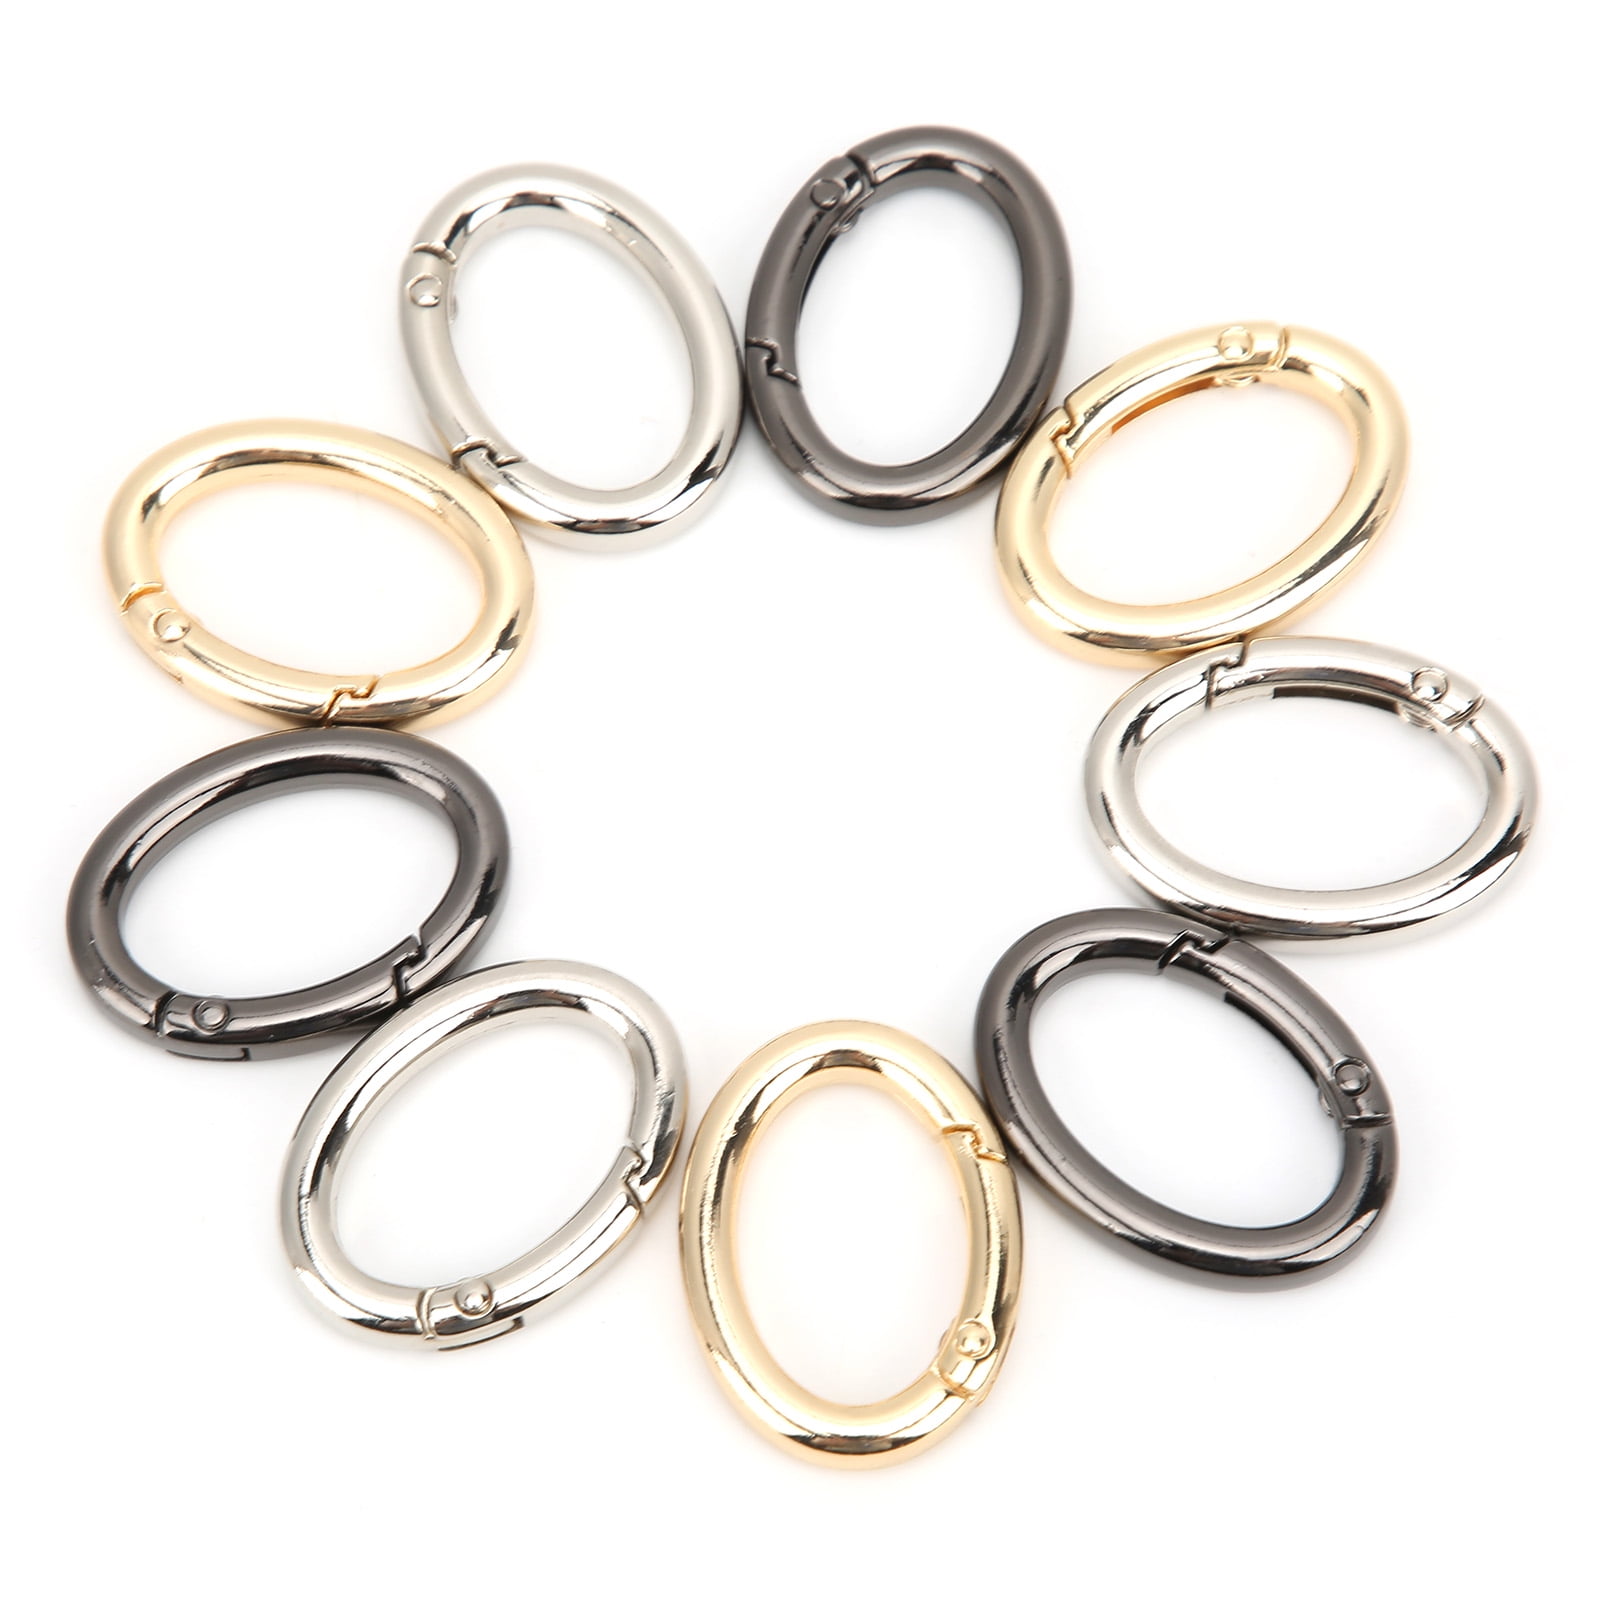 5pcs Round Carabiner Keychain Spring Snap Clip Ring for Camping Climbing 